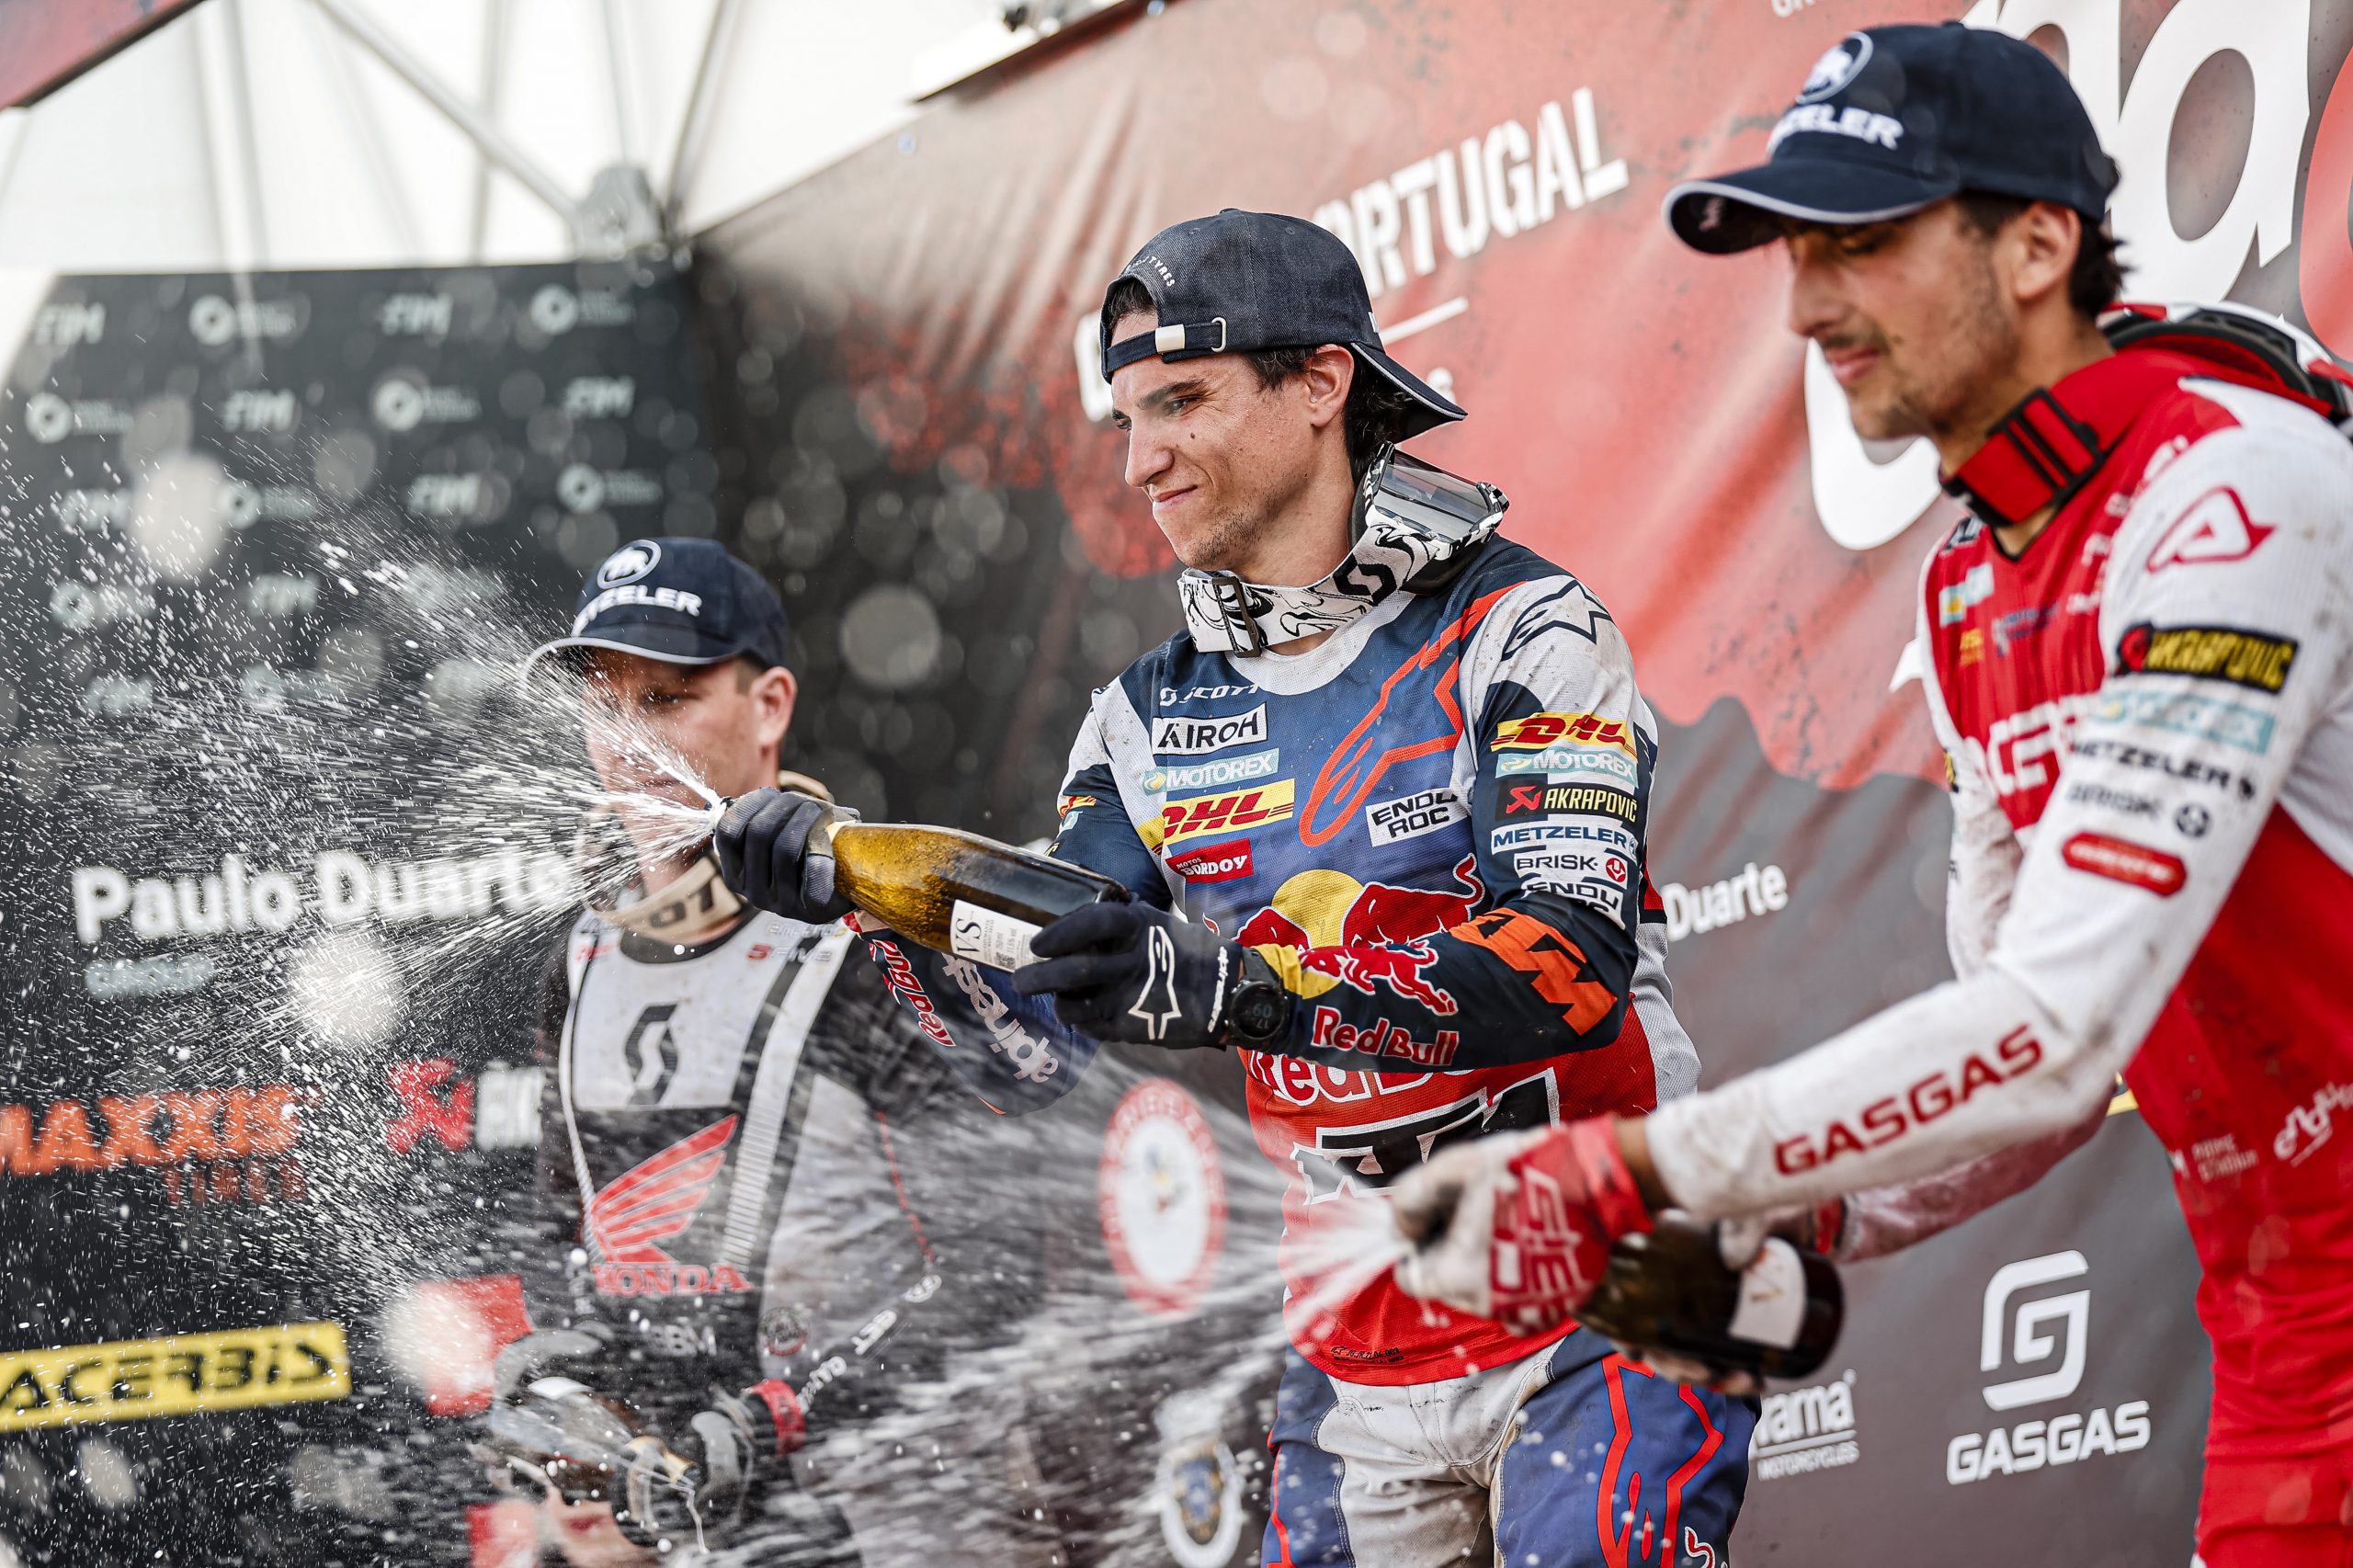 Winning Ride For Josep Garcia On Day One At Round Two Of EnduroGP